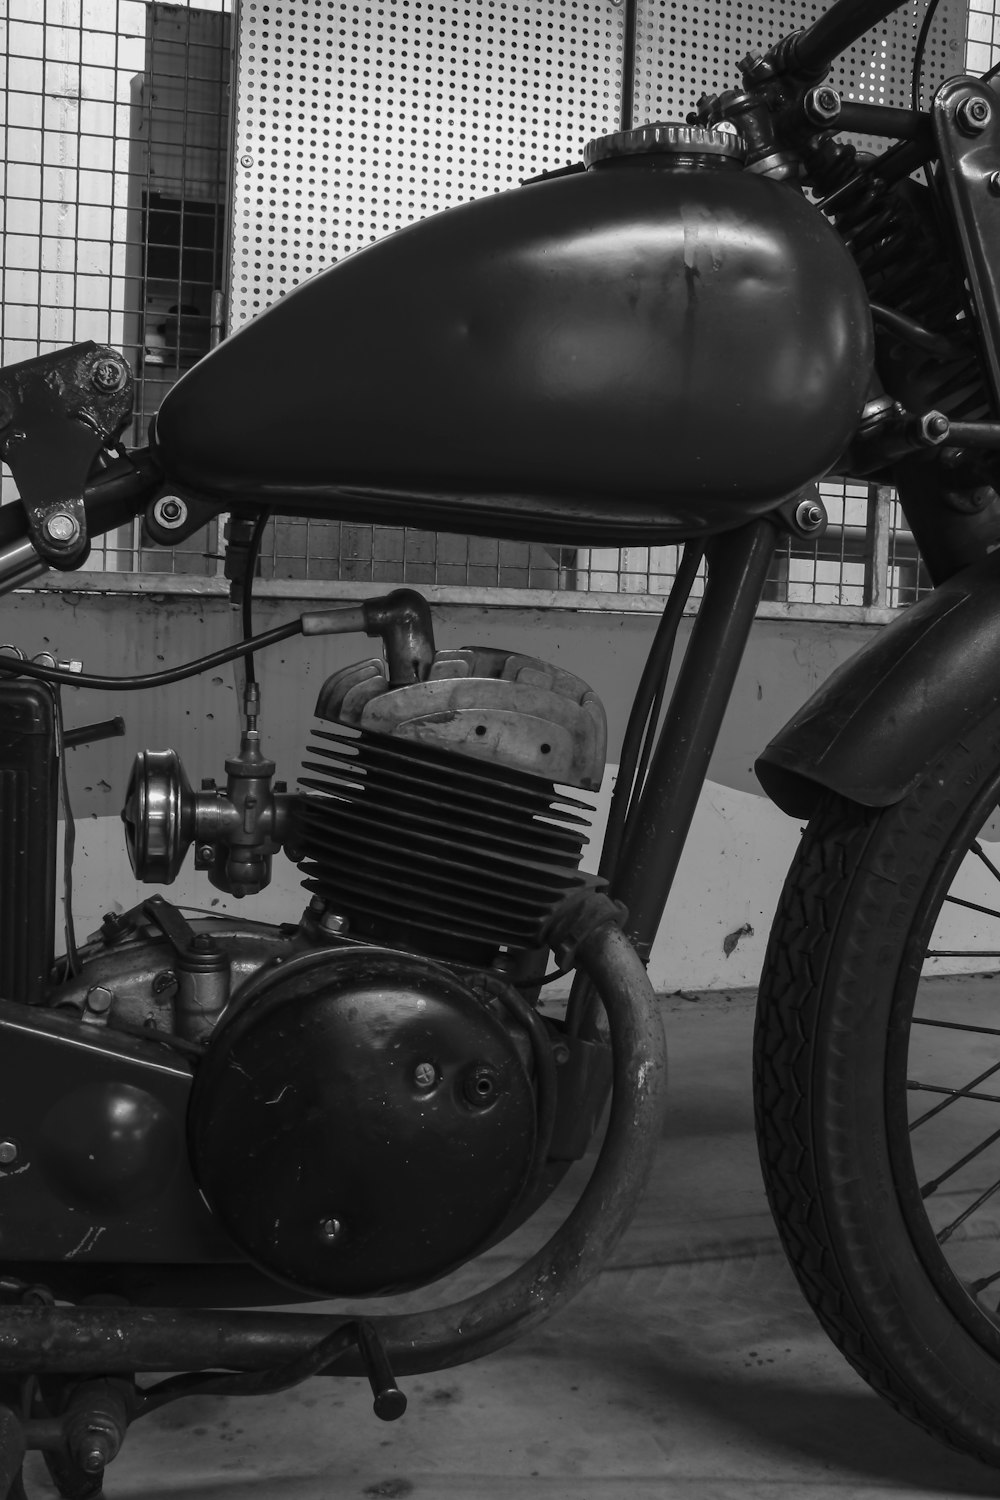 grayscale photo of vintage motorcycle